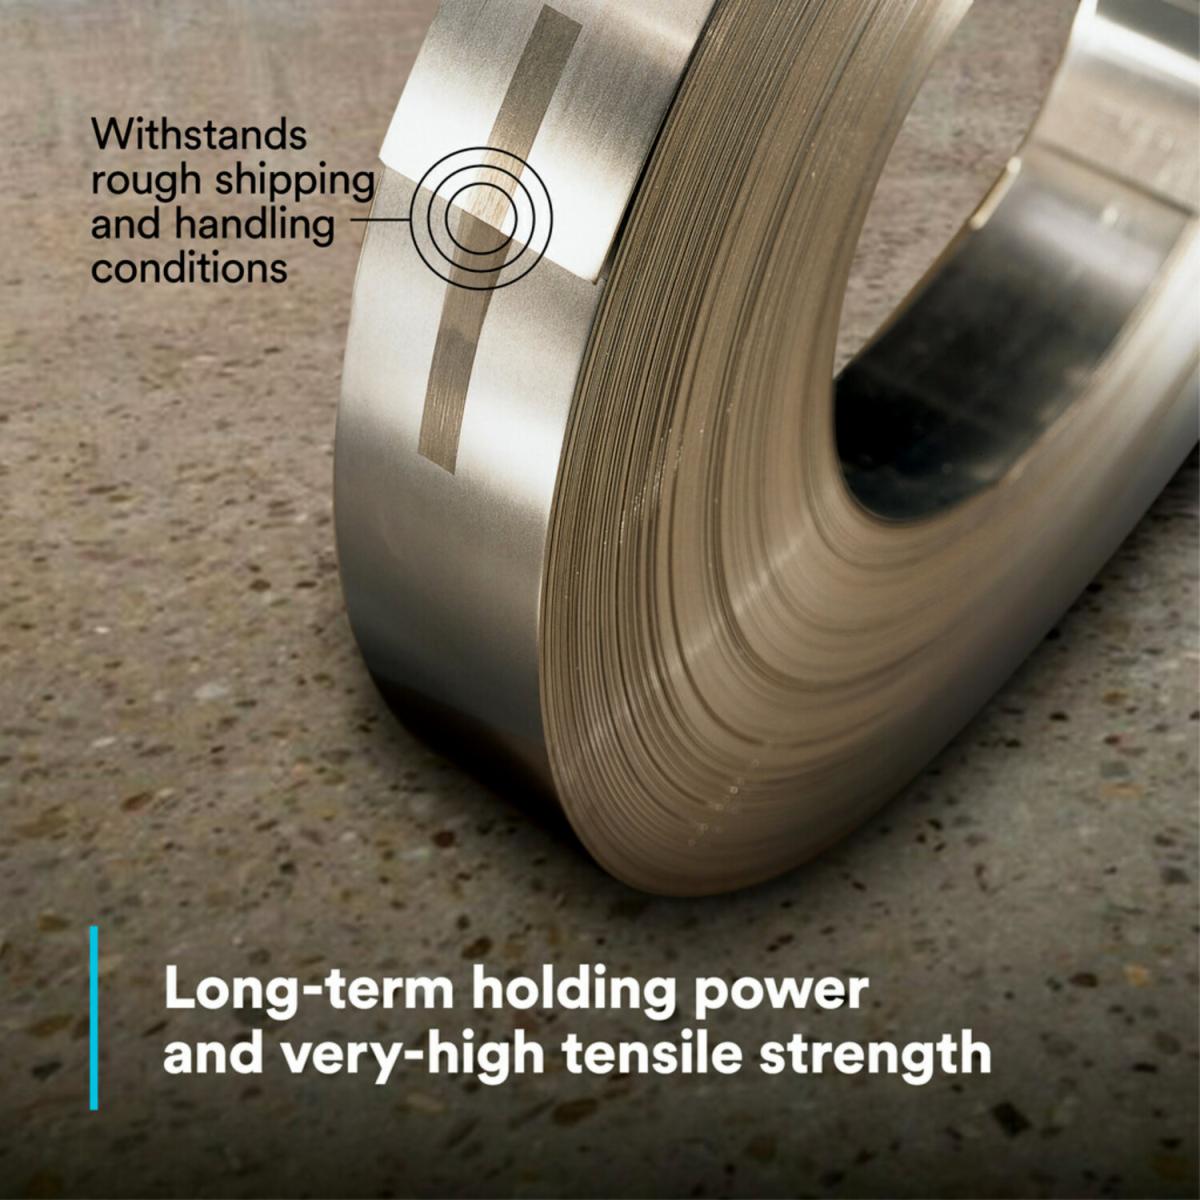 long-term-holding-power-and-very-high-tensile-strength